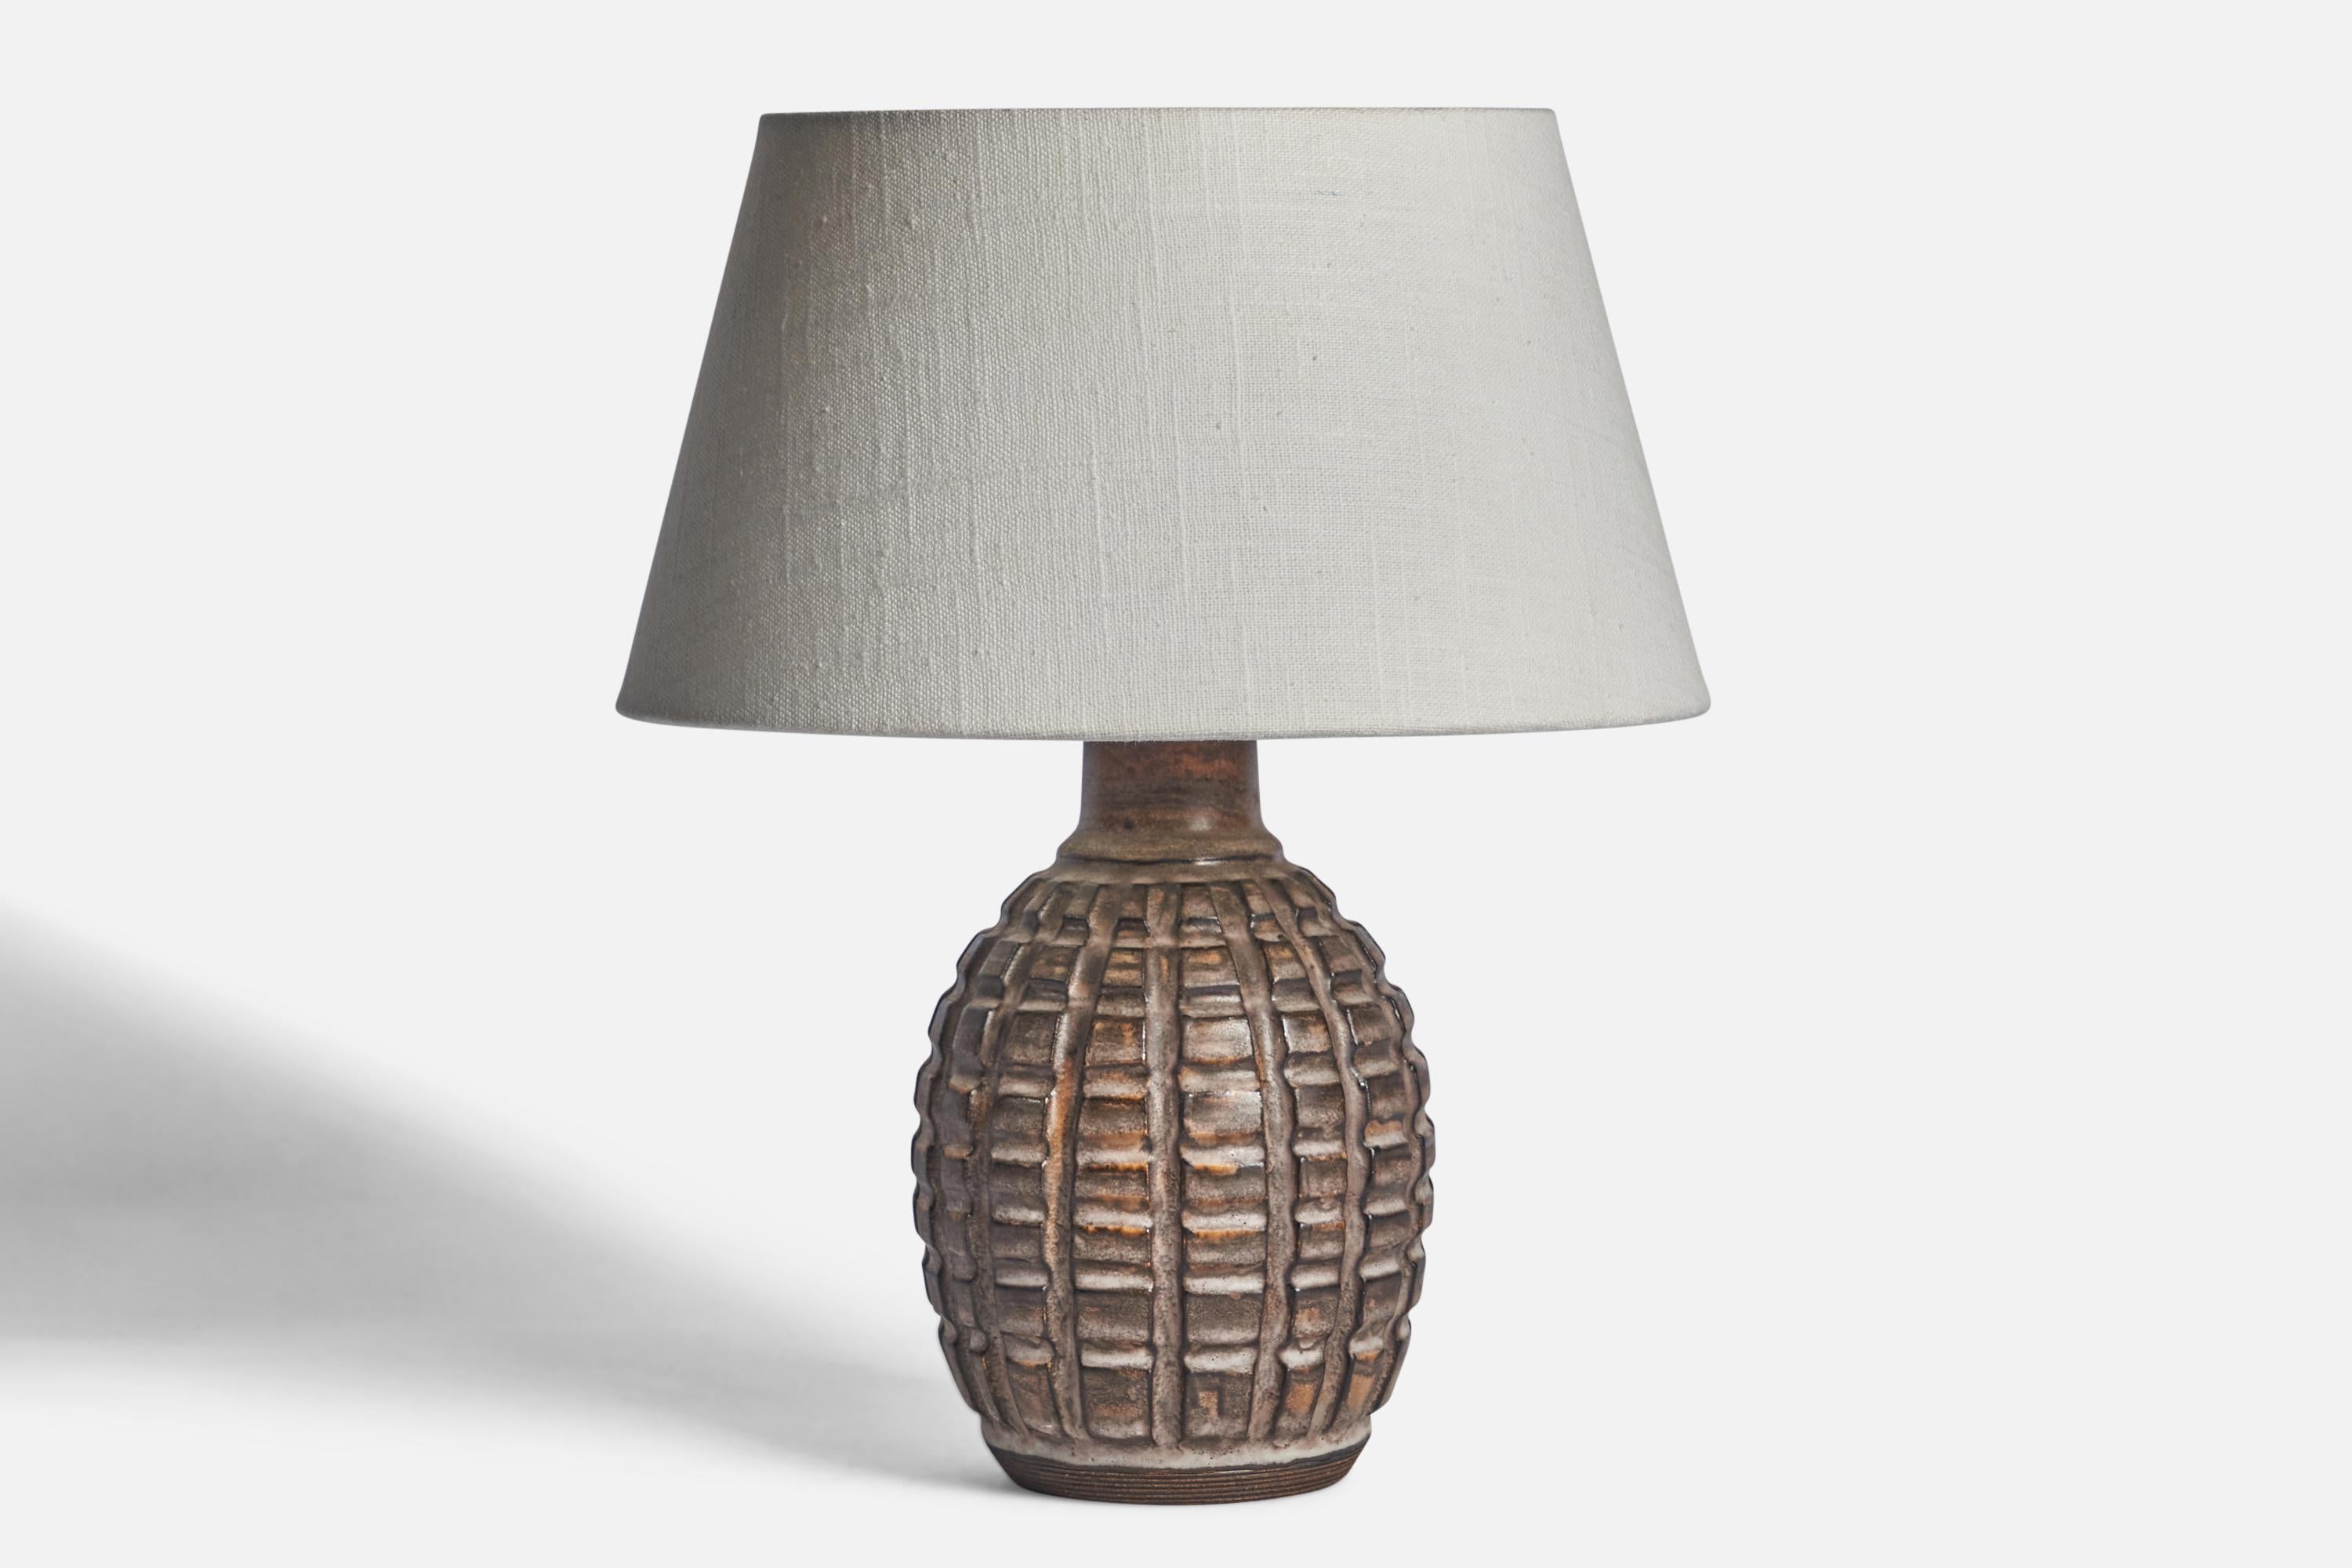 A brown-glazed stoneware table lamp designed and produced by Irma Yourstone, Sweden, c. 1960s.

Dimensions of Lamp (inches): 9.85” H x 4.75” Diameter
Dimensions of Shade (inches): 7” Top Diameter x 10” Bottom Diameter x 5.5” H 
Dimensions of Lamp